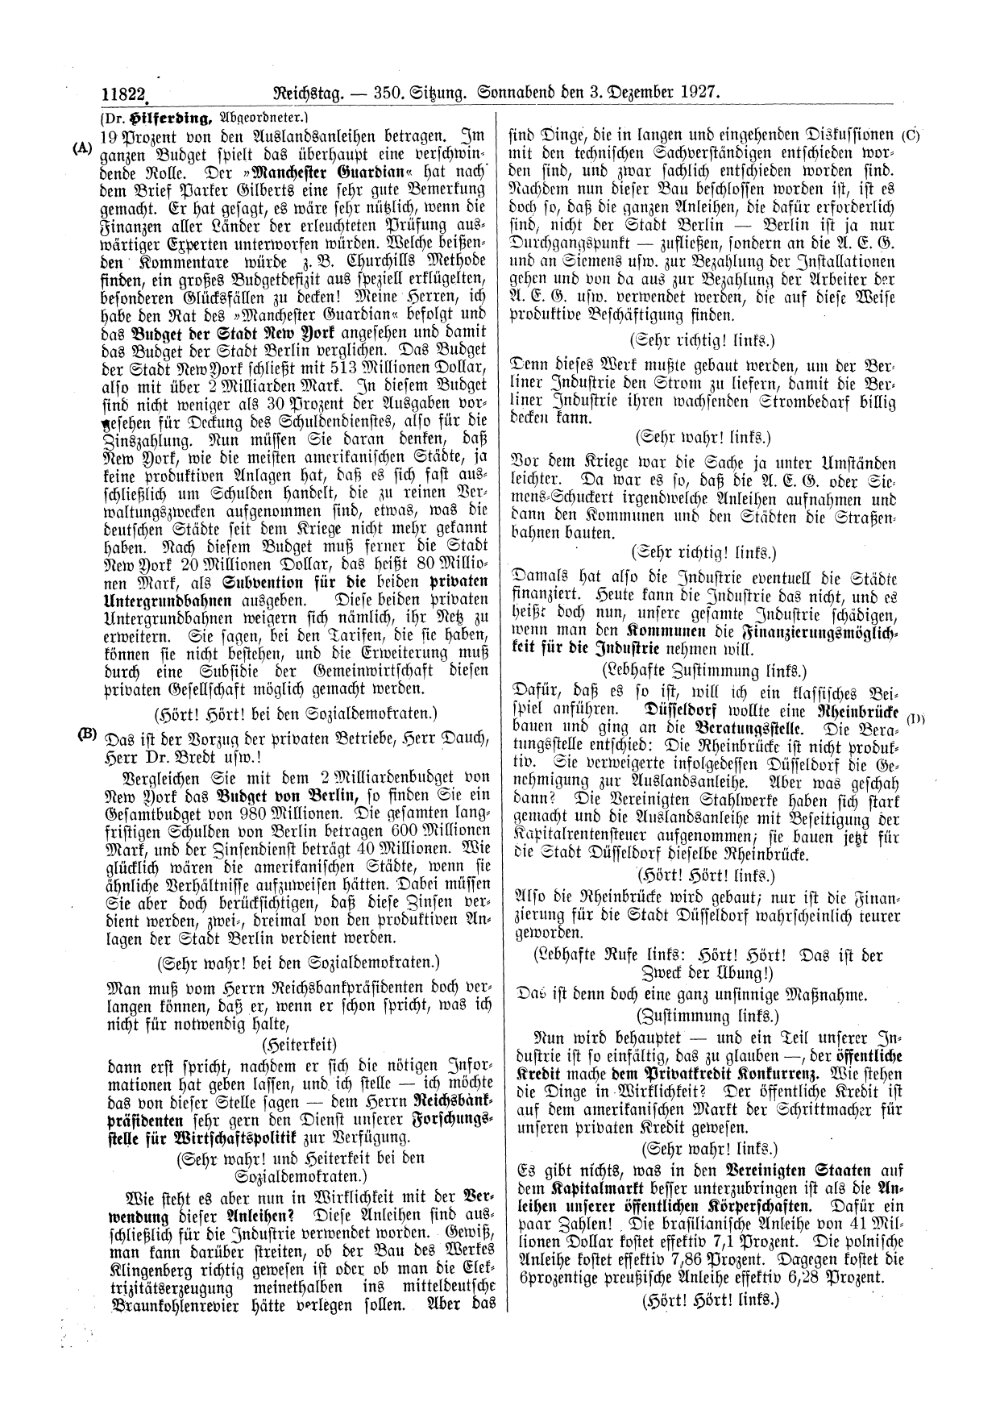 Scan of page 11822